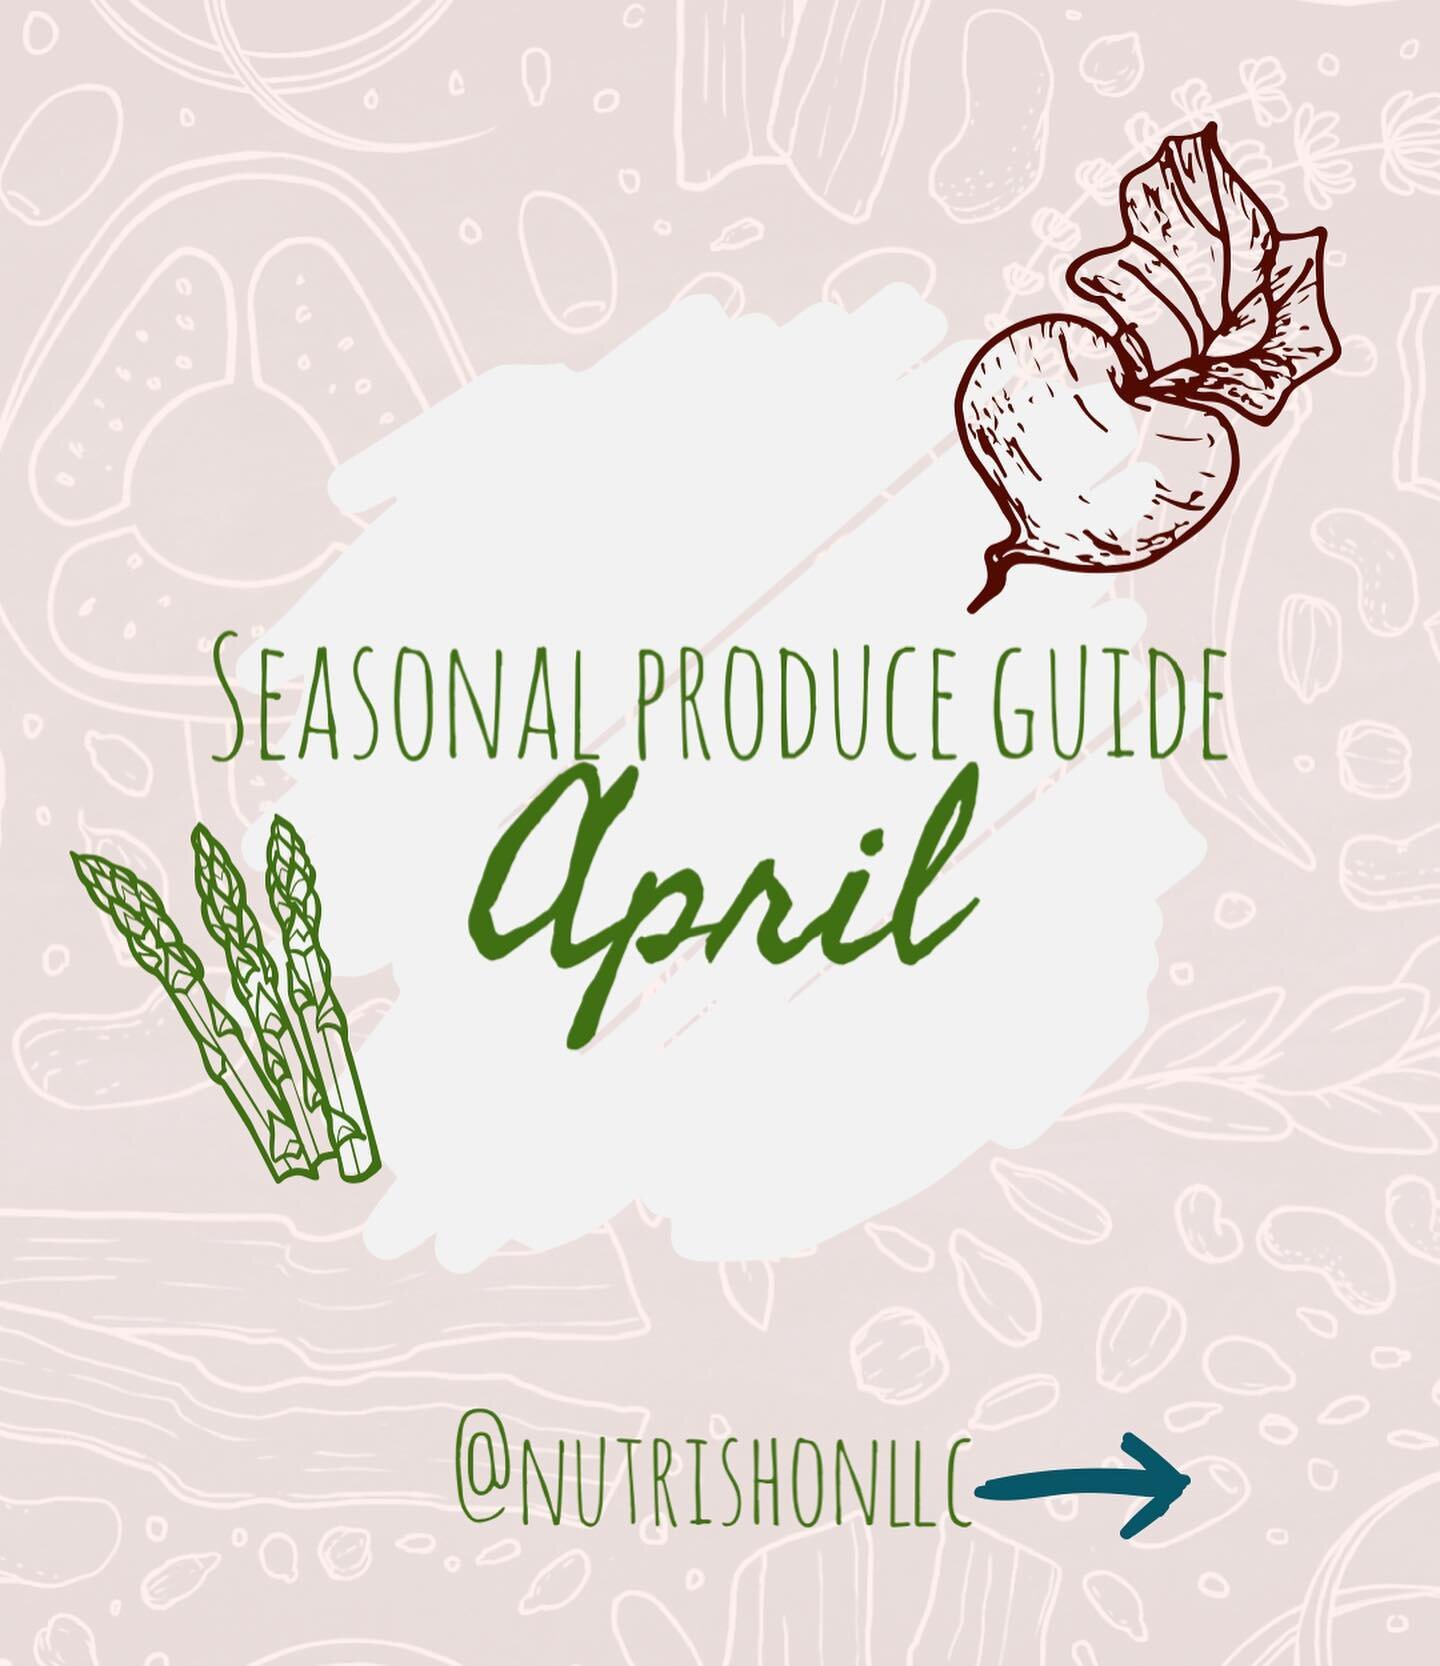 SAVE this post for future reference! 

April starts tomorrow and with it comes a new list of in-season produce! 

Eating seasonally is good for you, the environment, and your wallet! 

Try incorporating as many fruits and veggies in your daily routin